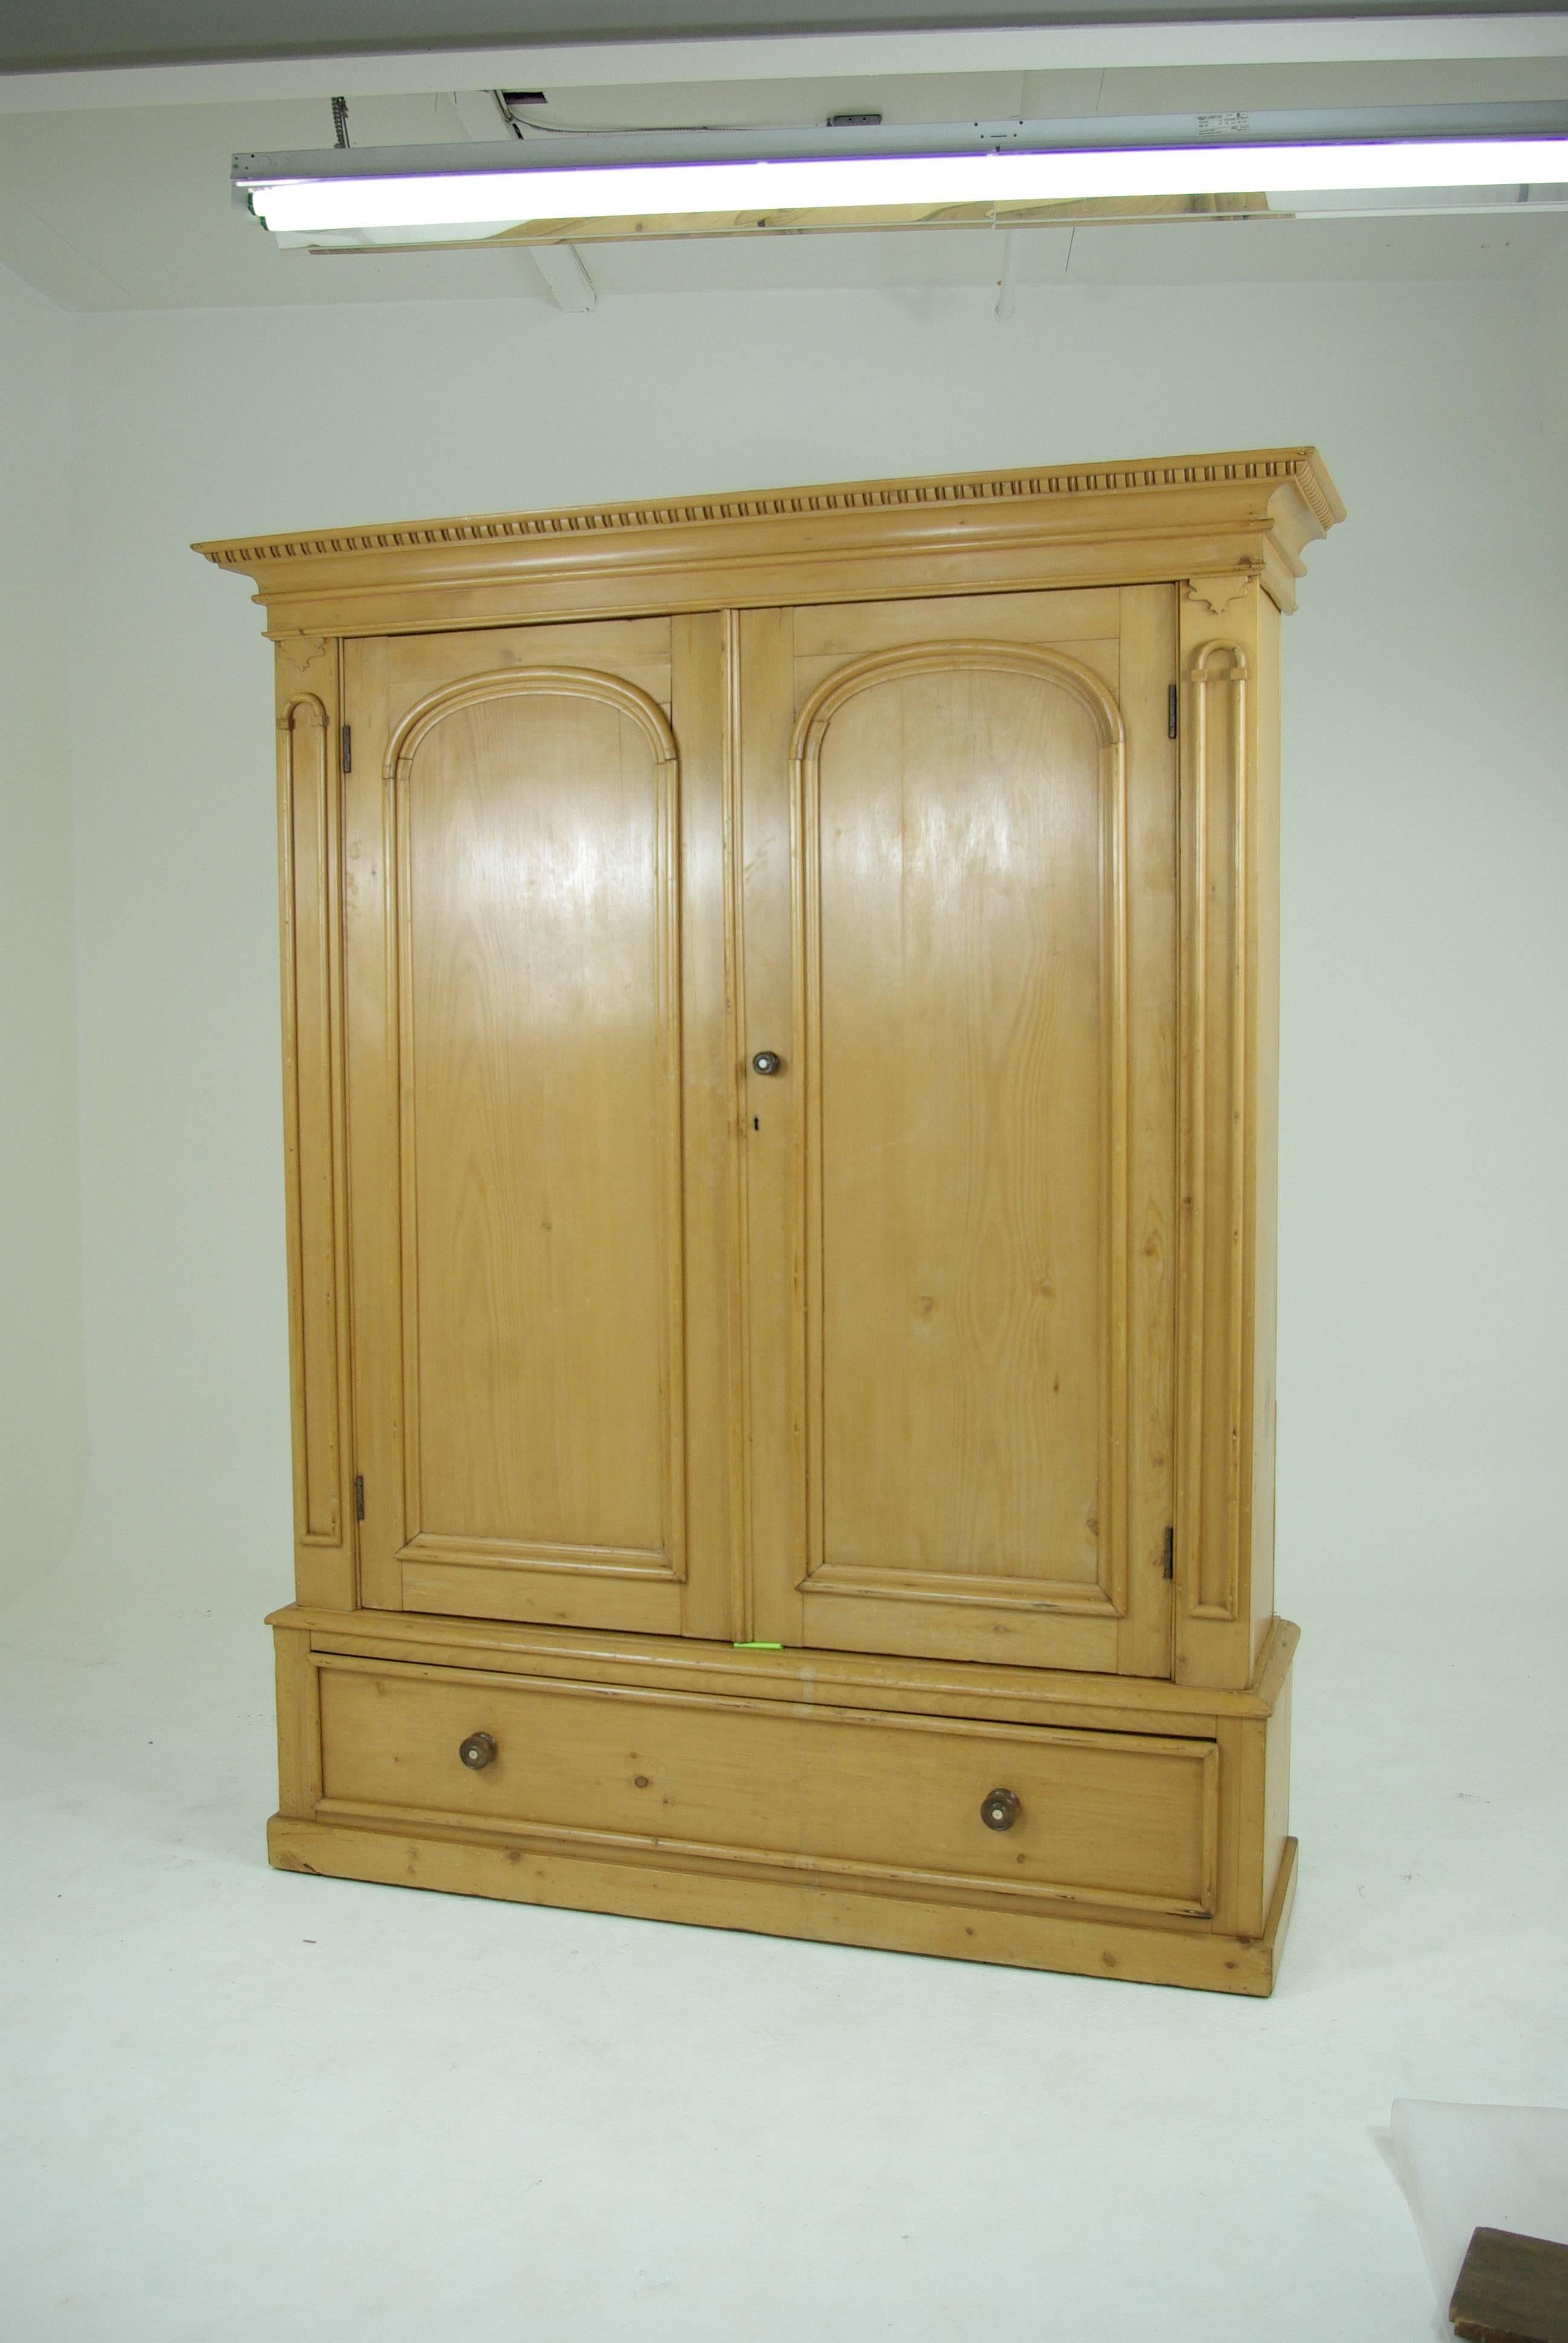 Late 19th Century B281 Large Pine Two-Door Armoire, Wardrobe Display, Pantry Cabinet, Linen Closet